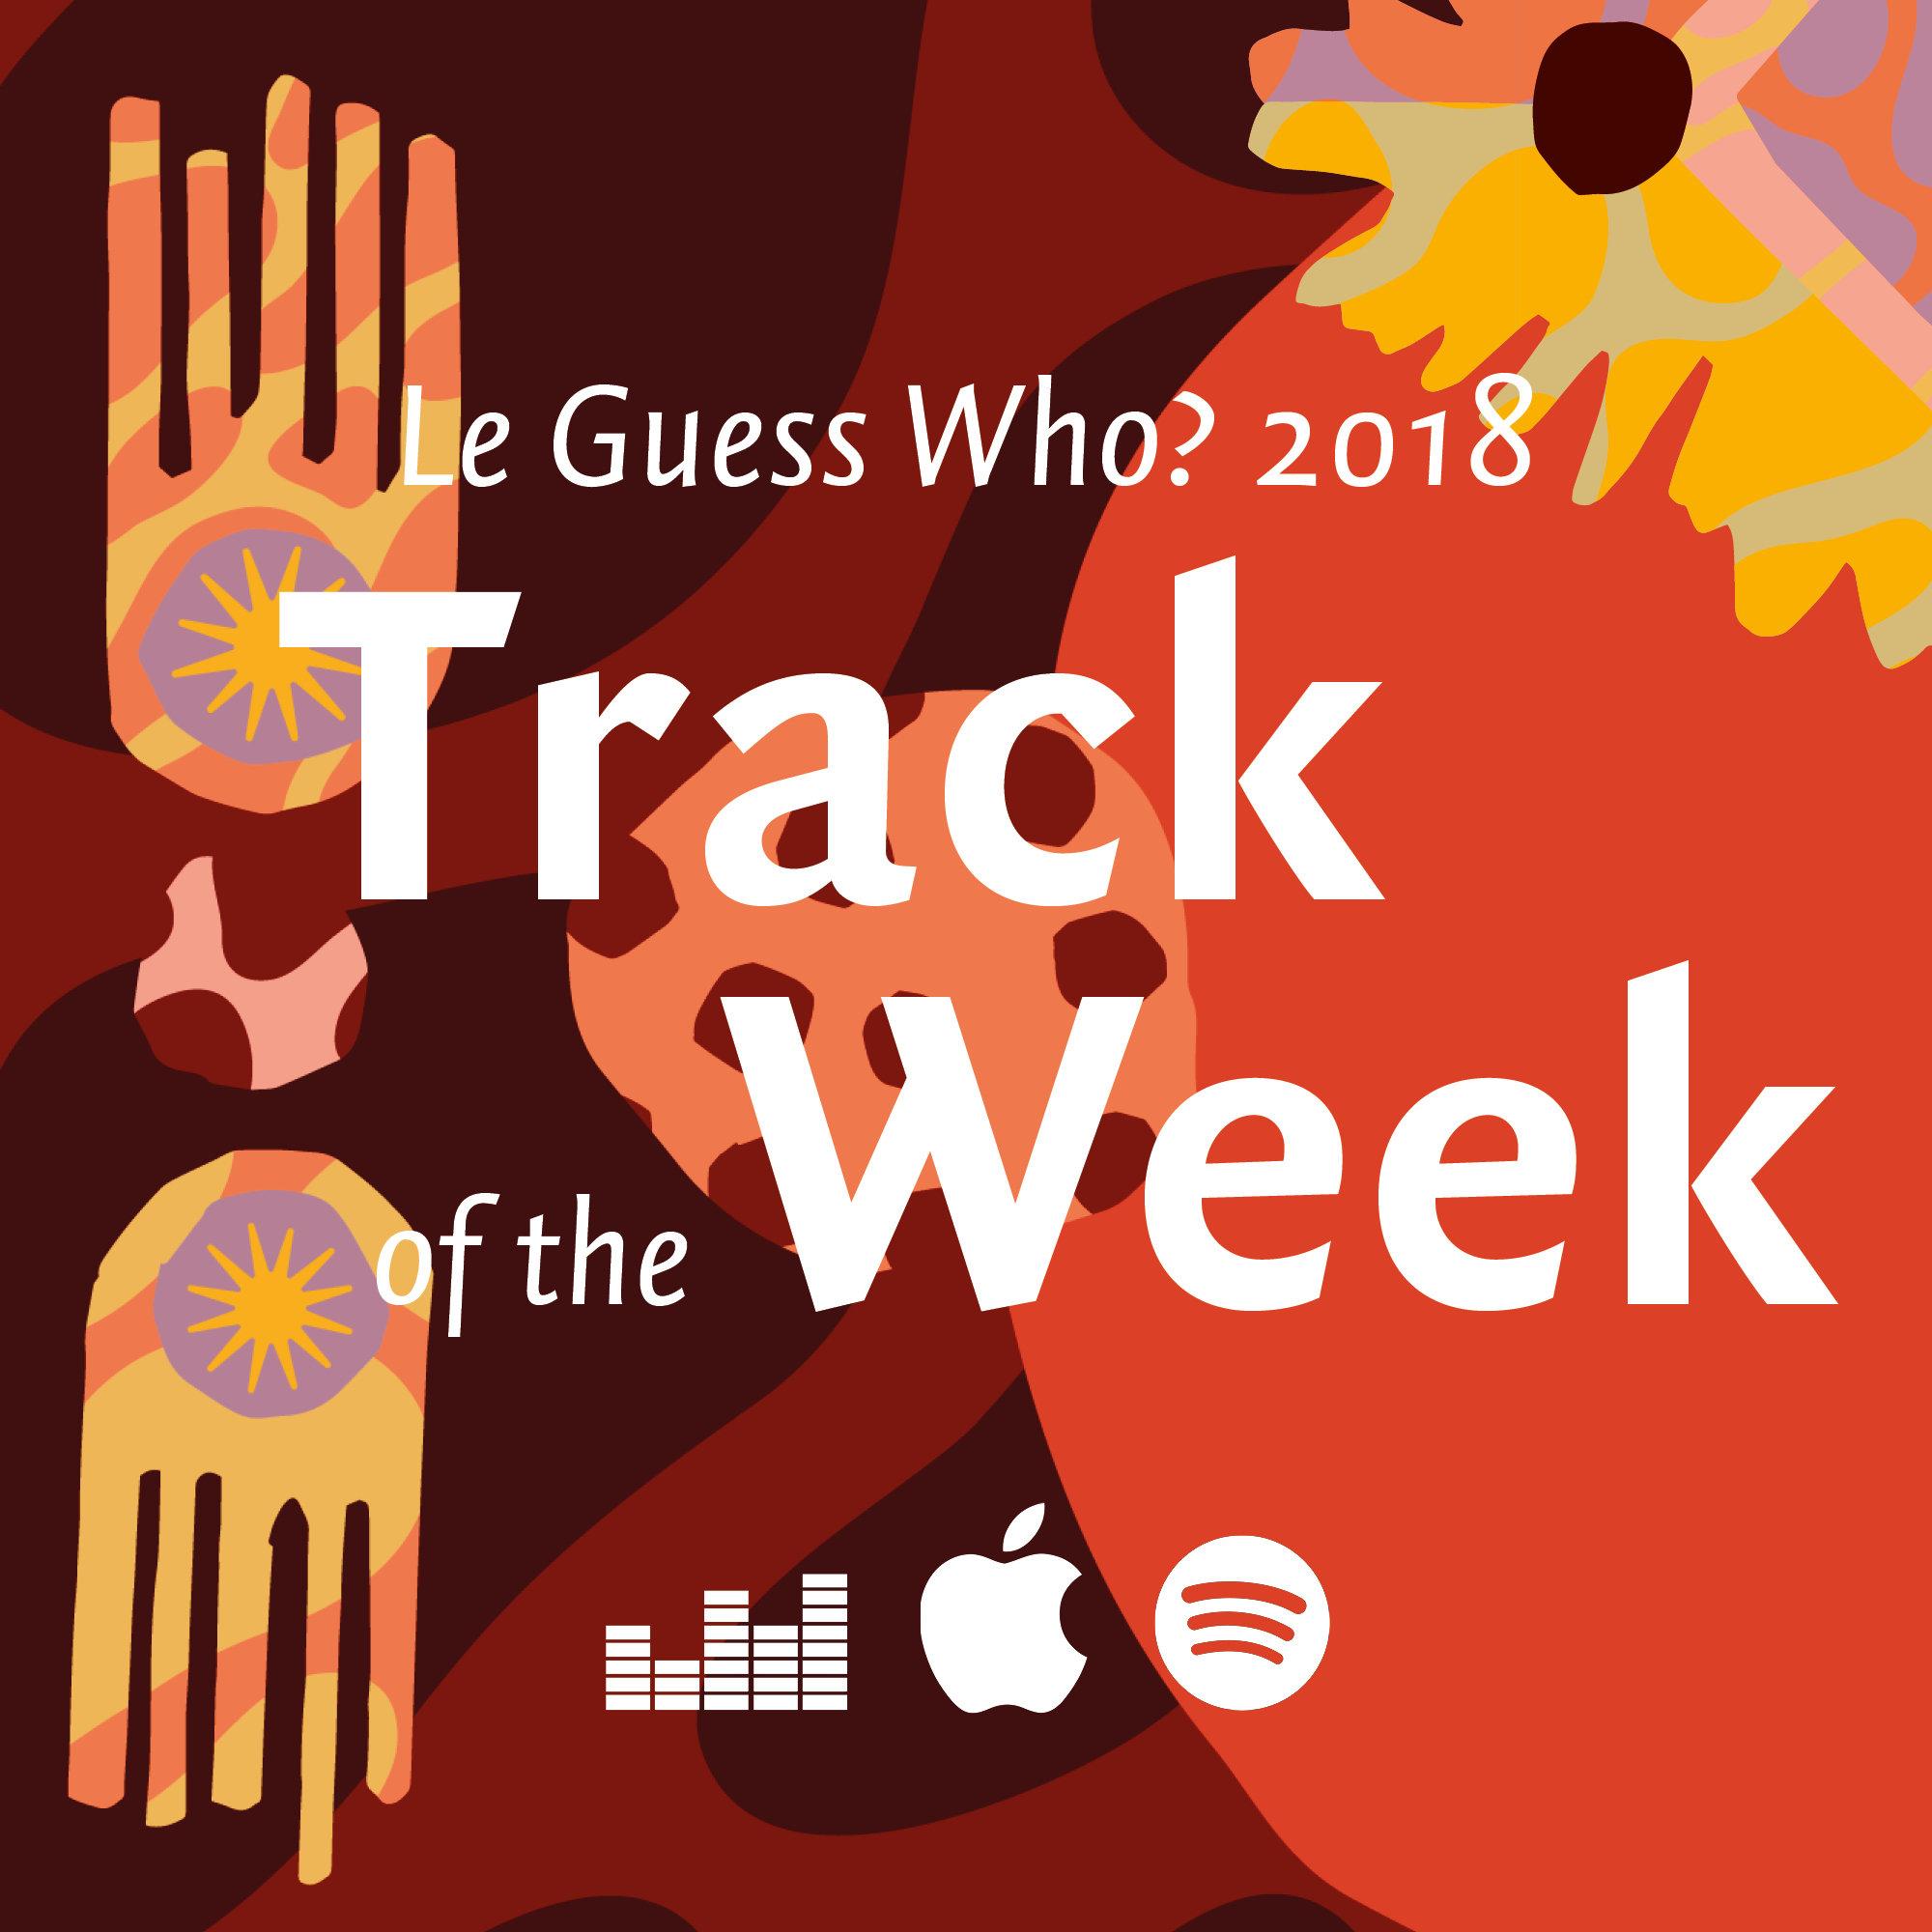 Playlist: Le Guess Who? 2018 - Track of the Week